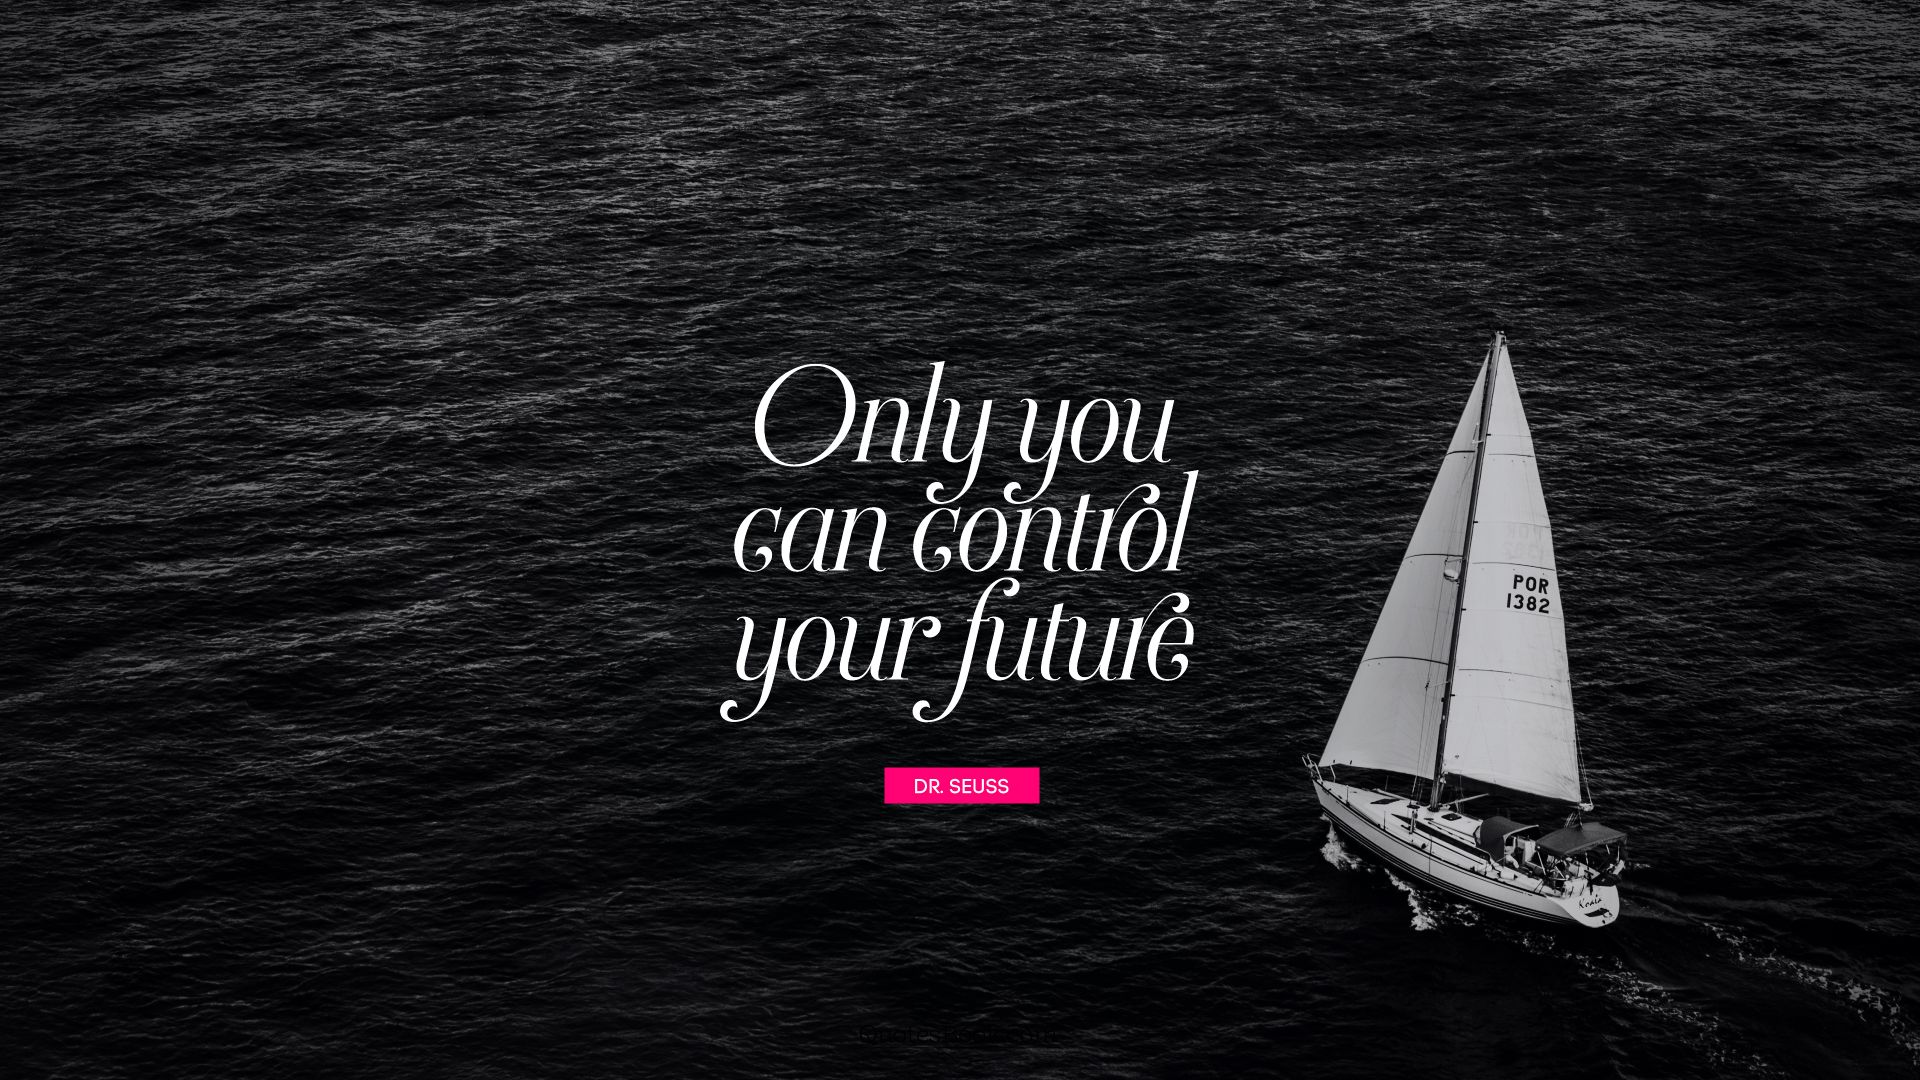 Only you can control your future. - Quote by Dr. Seuss